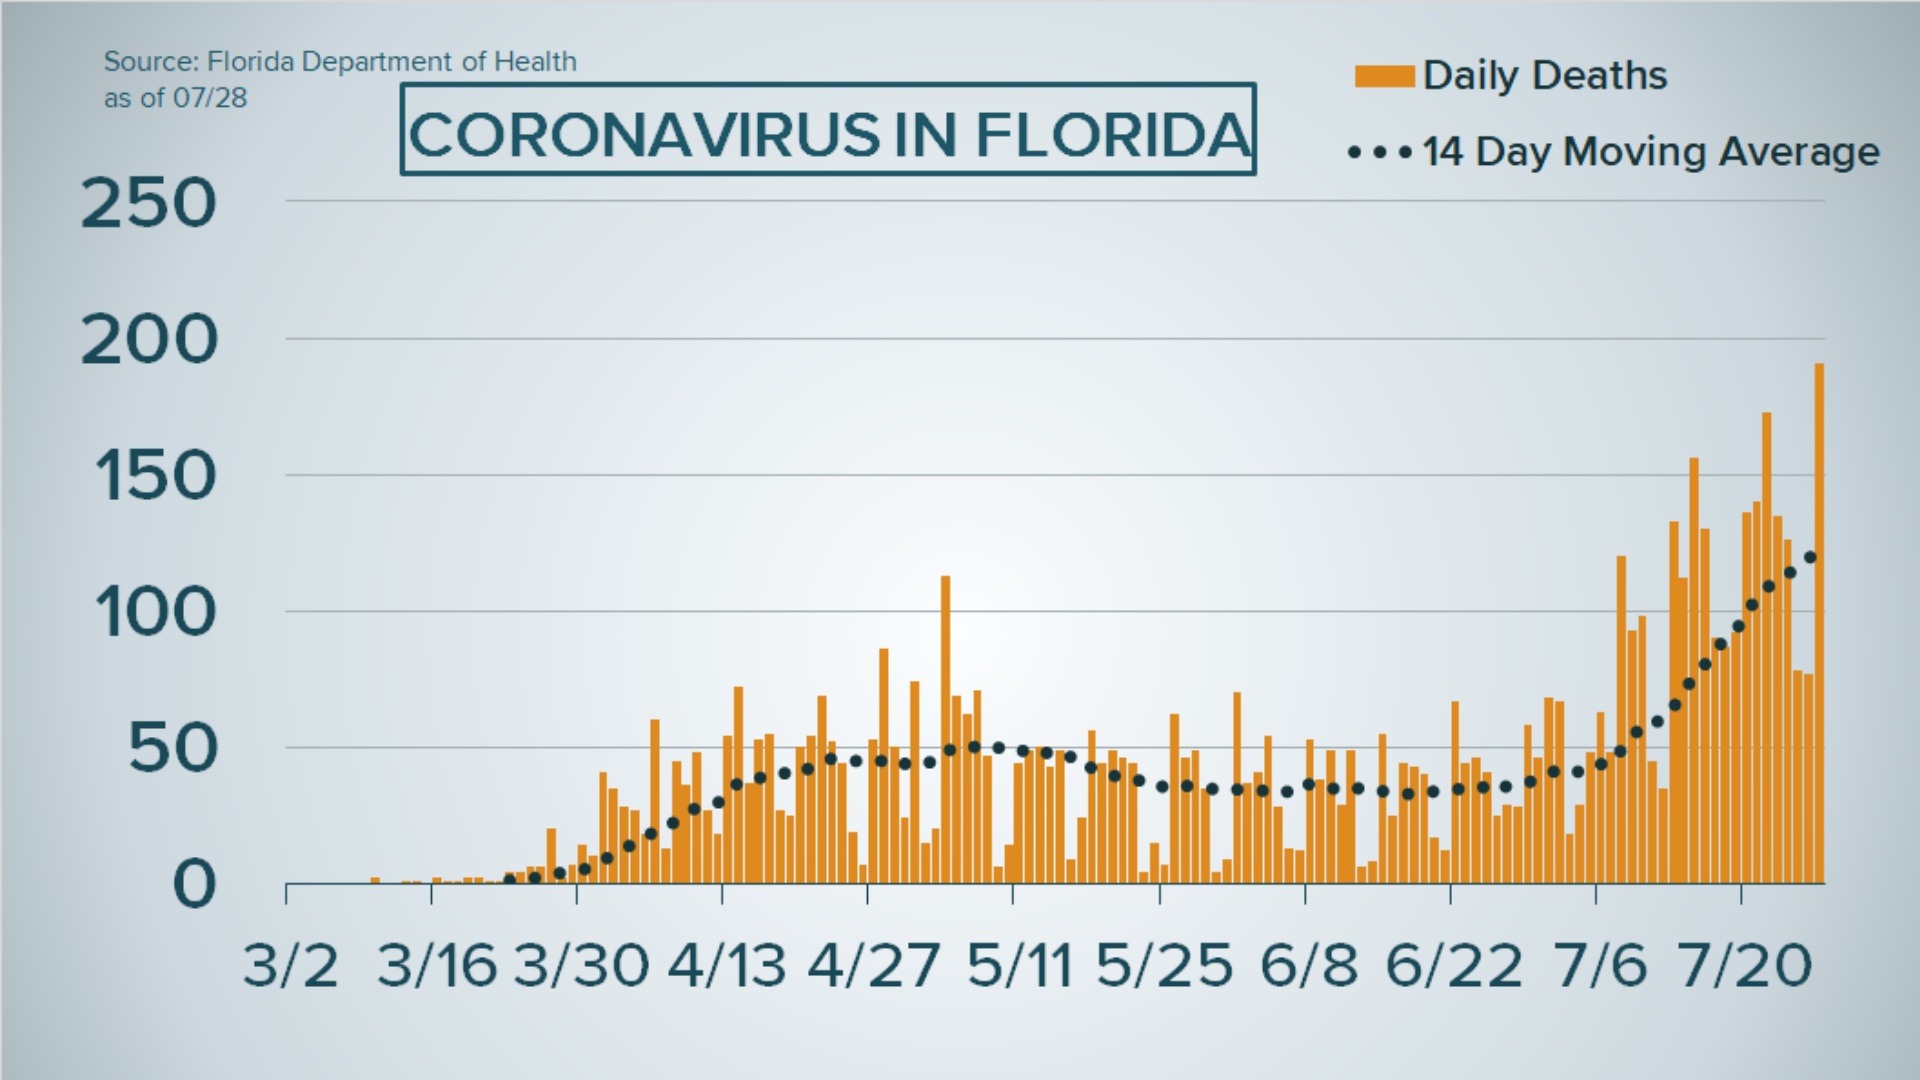 The Florida Department of Health also reported another 9,230 new cases of coronavirus for July 27.